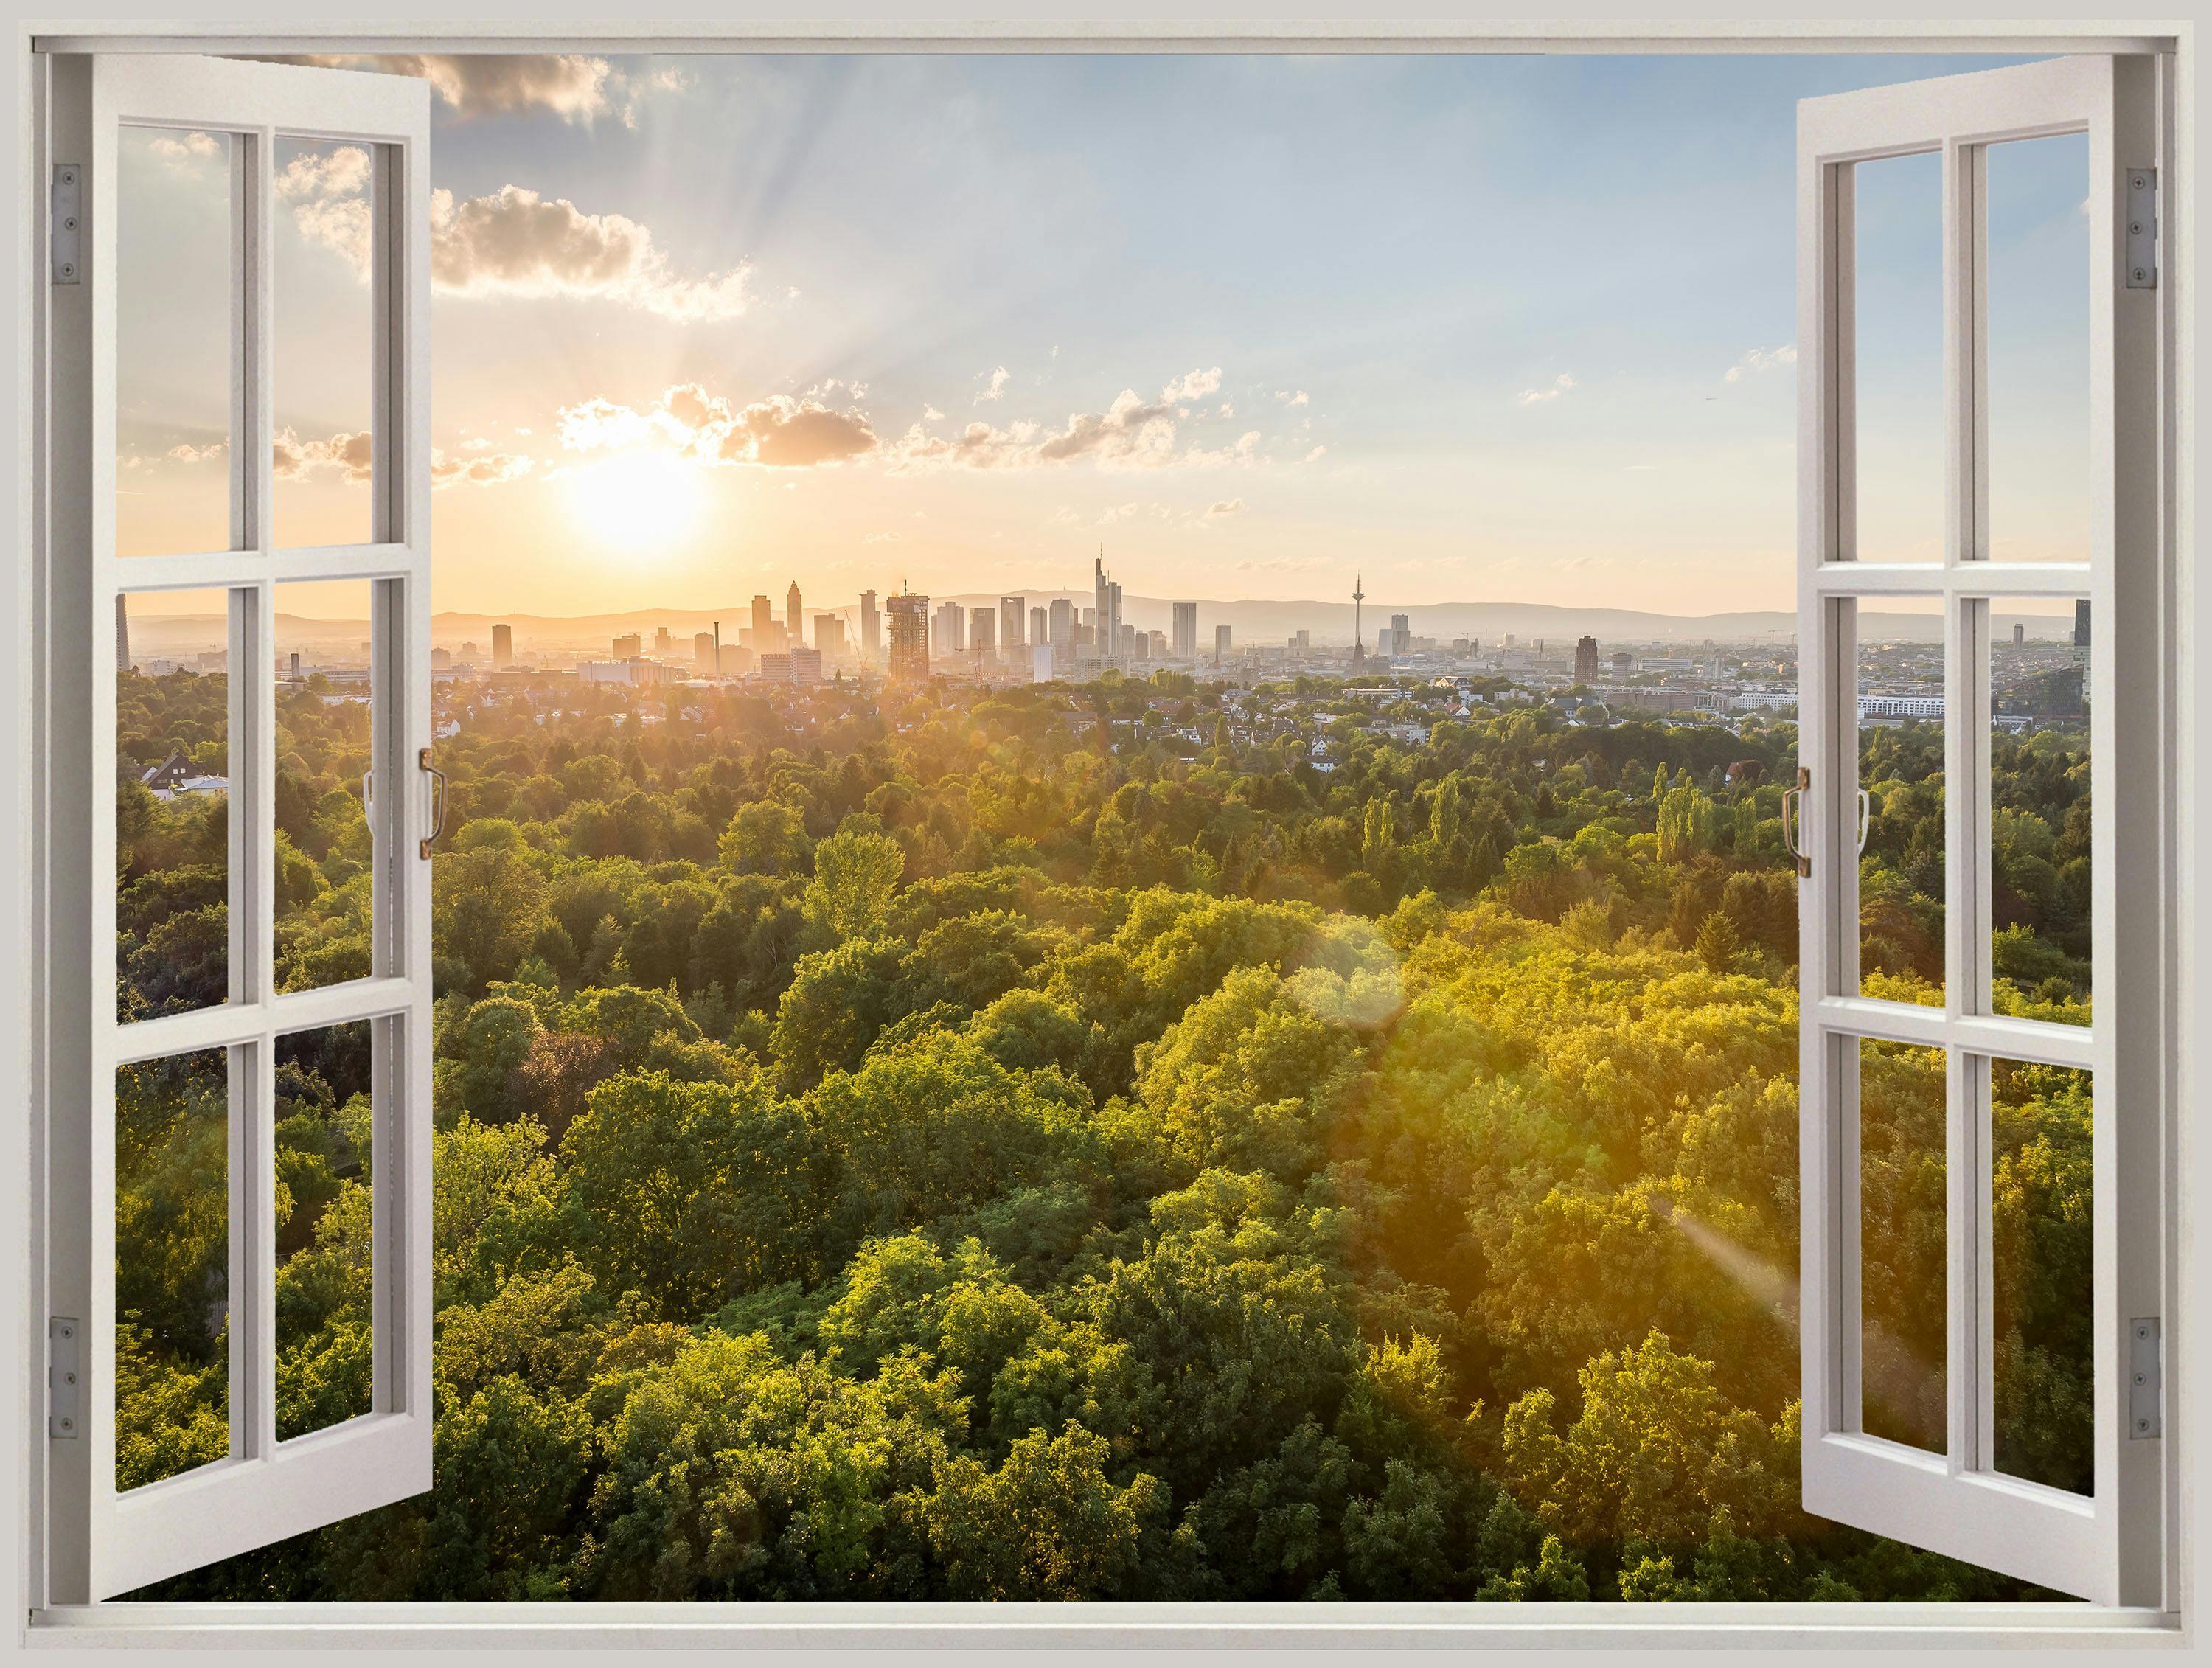 Open window looking out over a forest of trees with a city in the distance